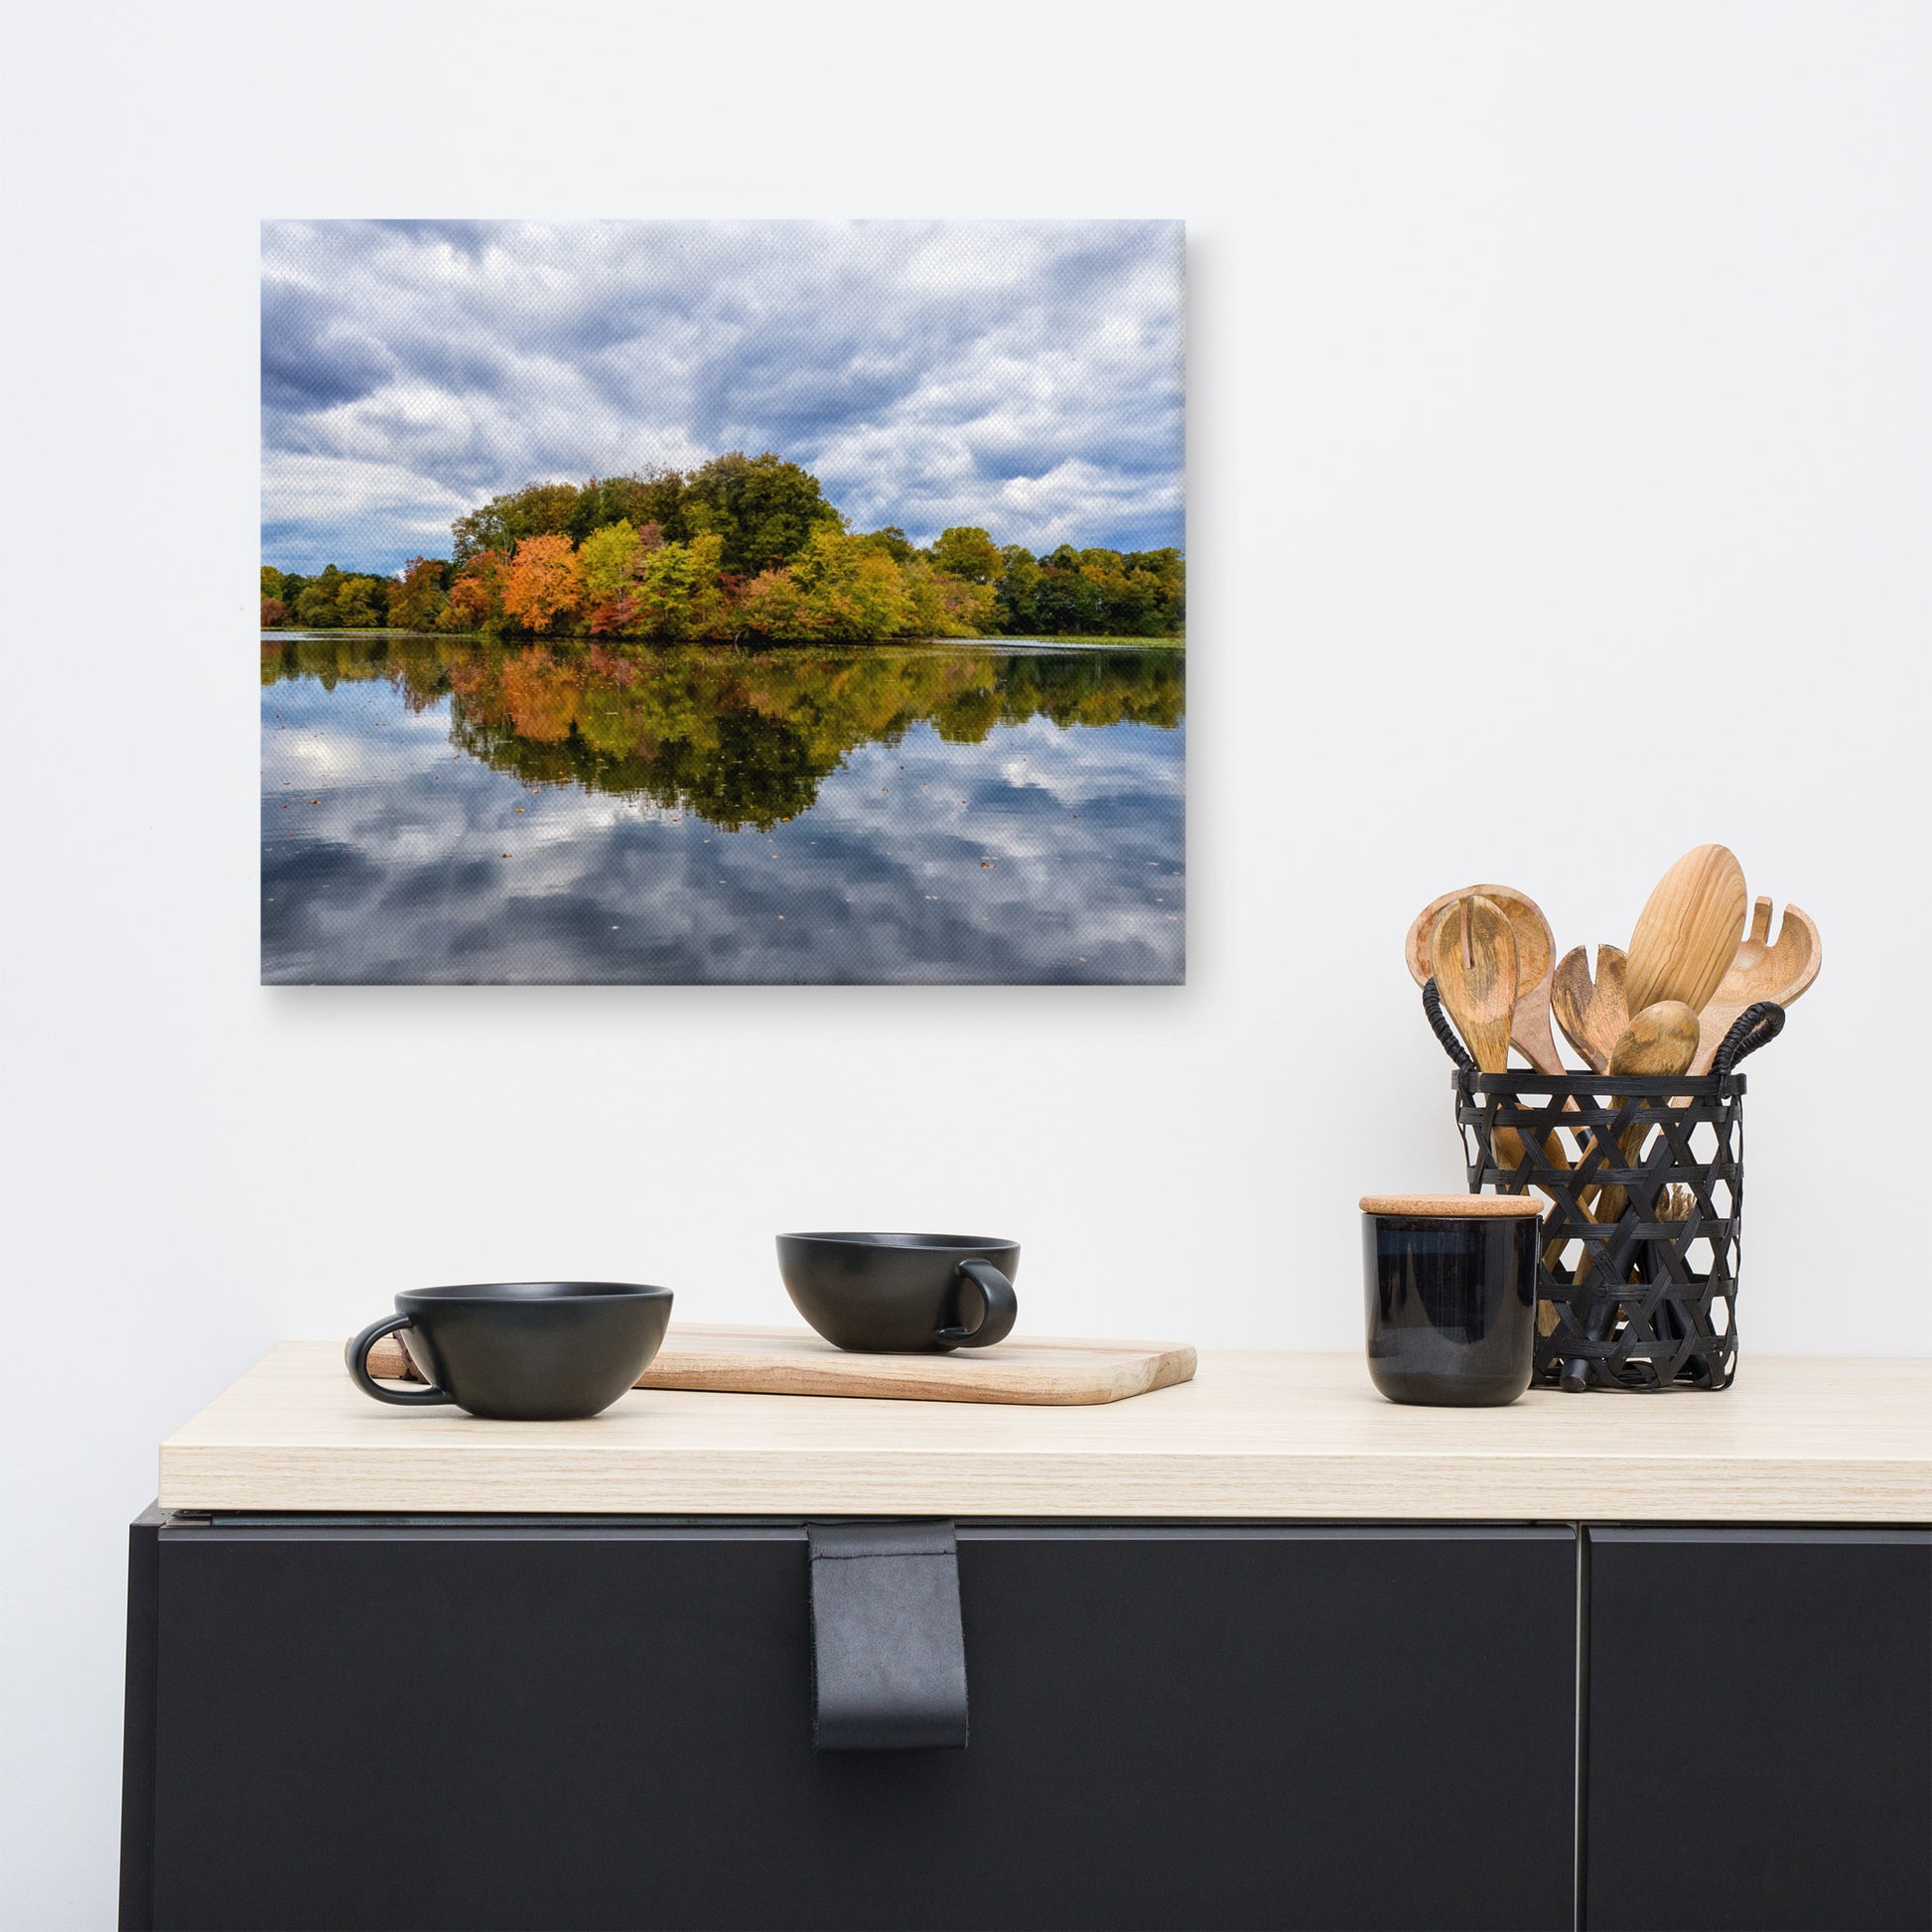 Canvas Pictures For Dining Room: Autumn Reflections - Farmhouse / Rural / Country Style Landscape / Nature Photograph Canvas Wall Art Print - Artwork - Wall Decor